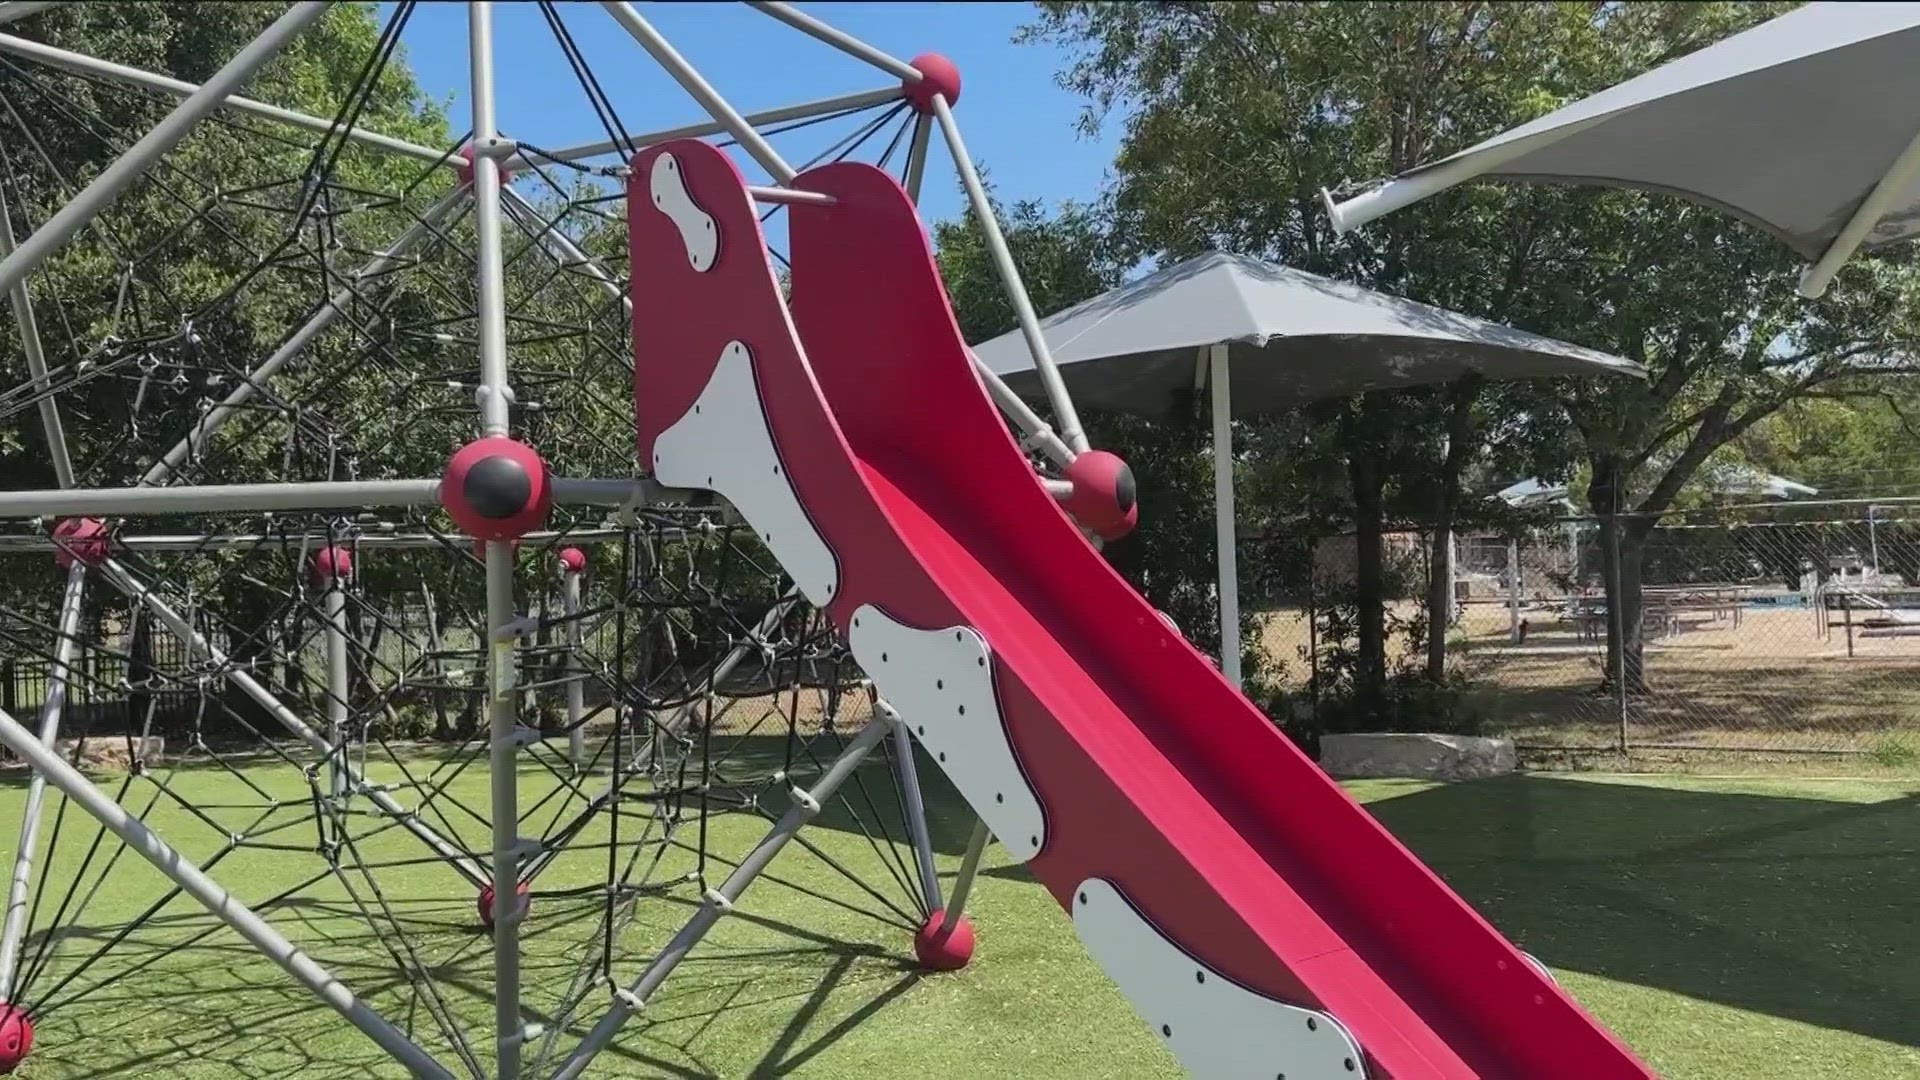 Firefighters say playground equipment may sometimes be too hot for kids to handle. KVUE's Dominique Newland has more on just how hot playgrounds can get.